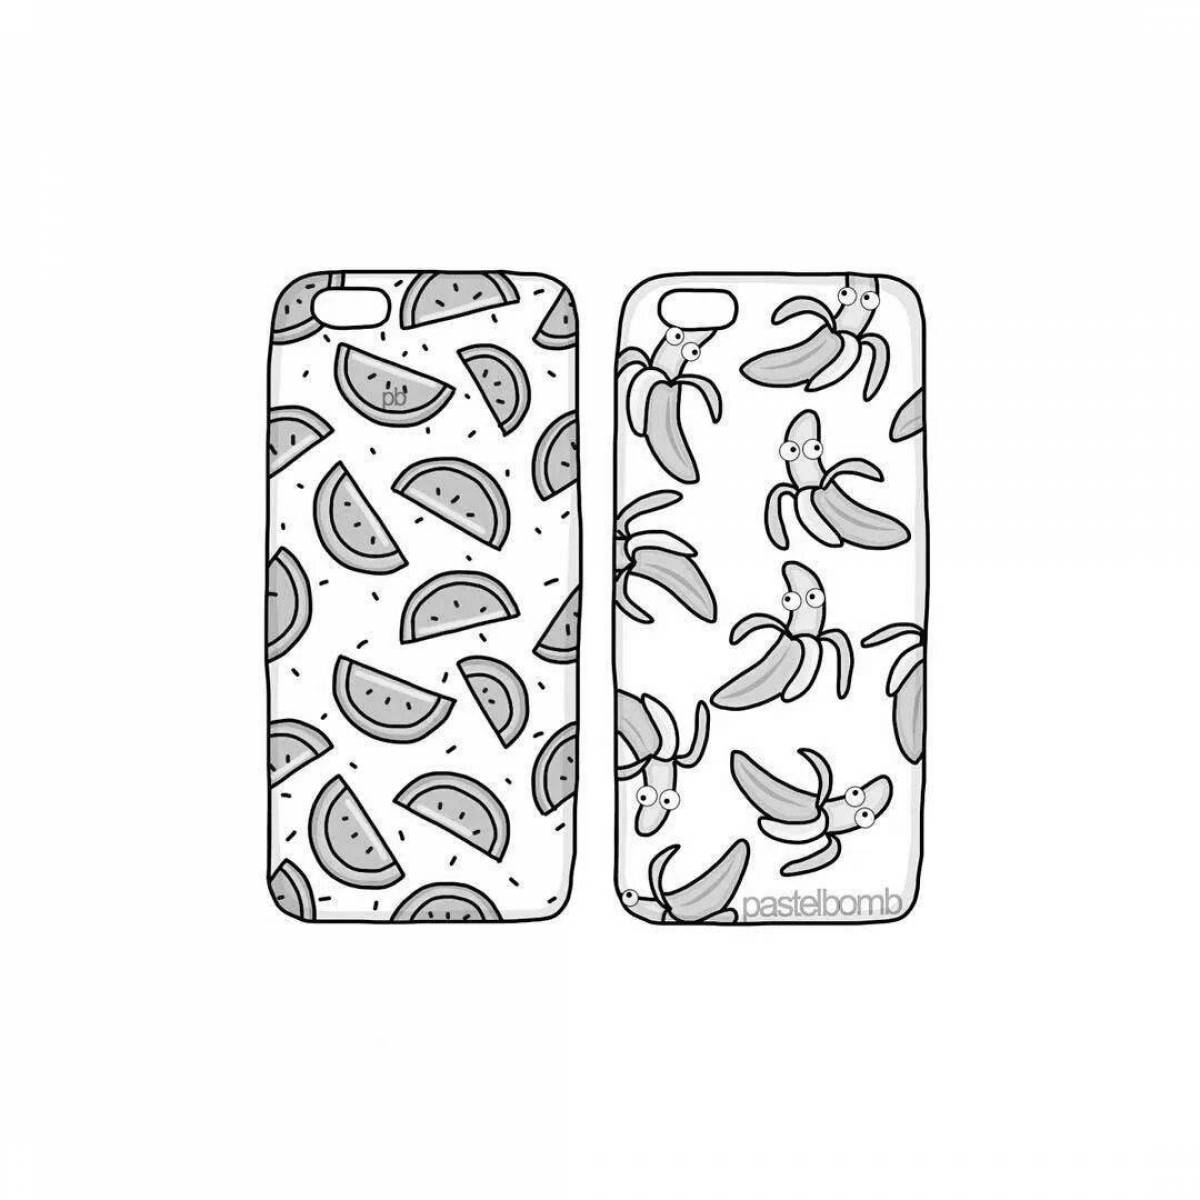 Creative phone case coloring page